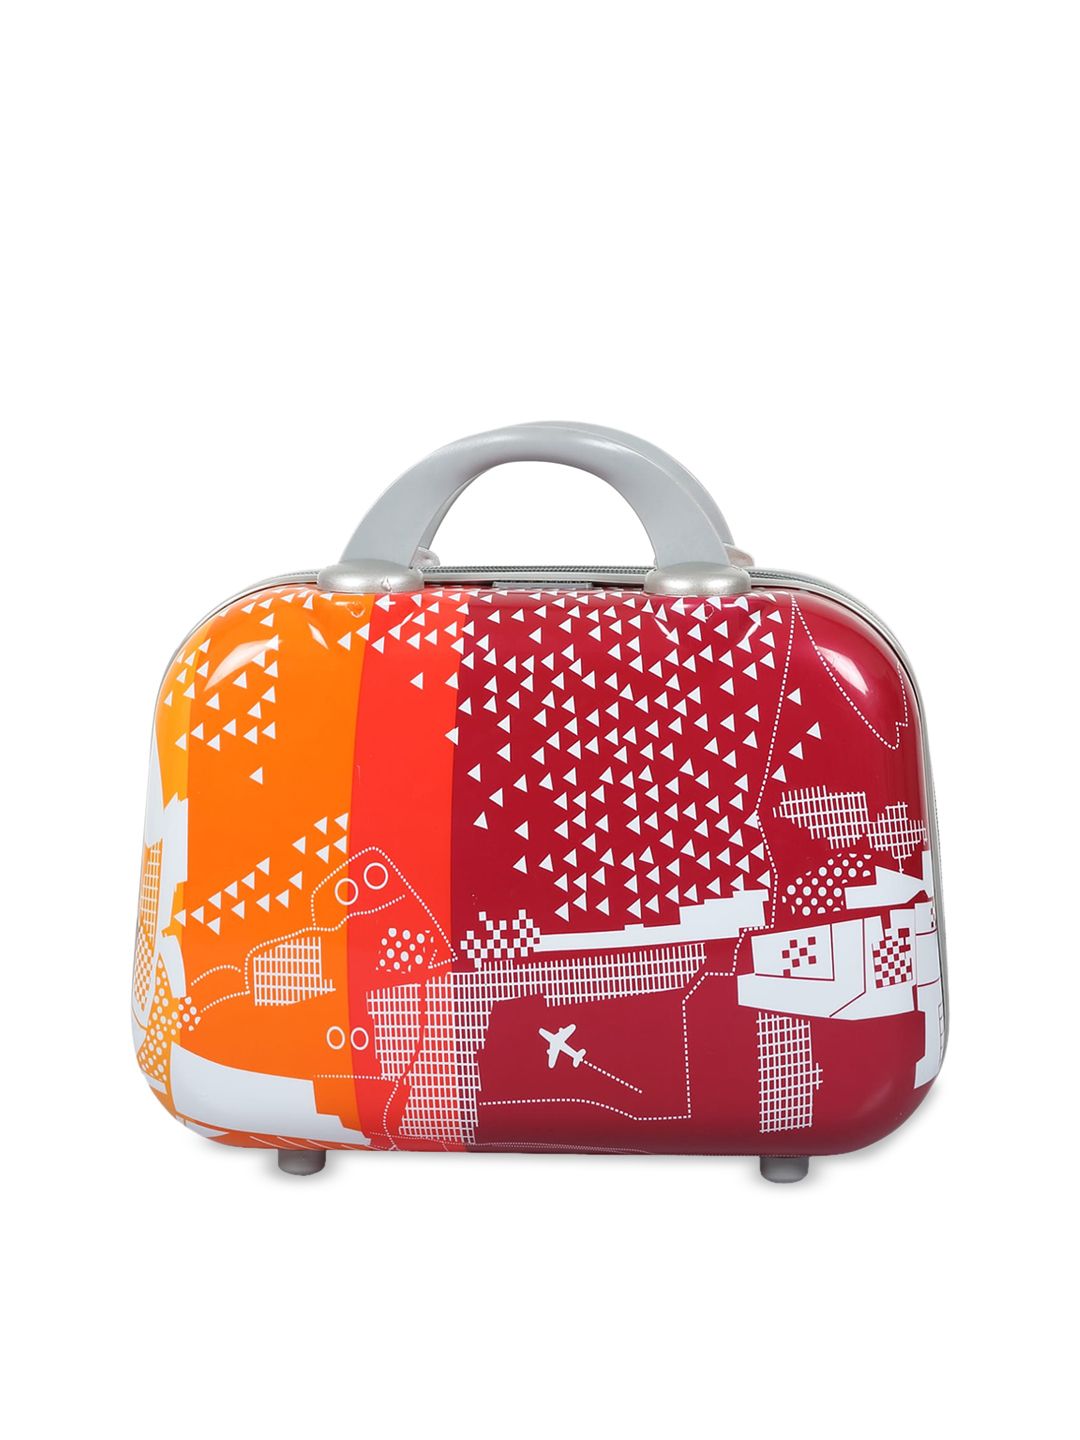 Polo Class Travel Big Vanity Bag - BB-2150-Red Price in India